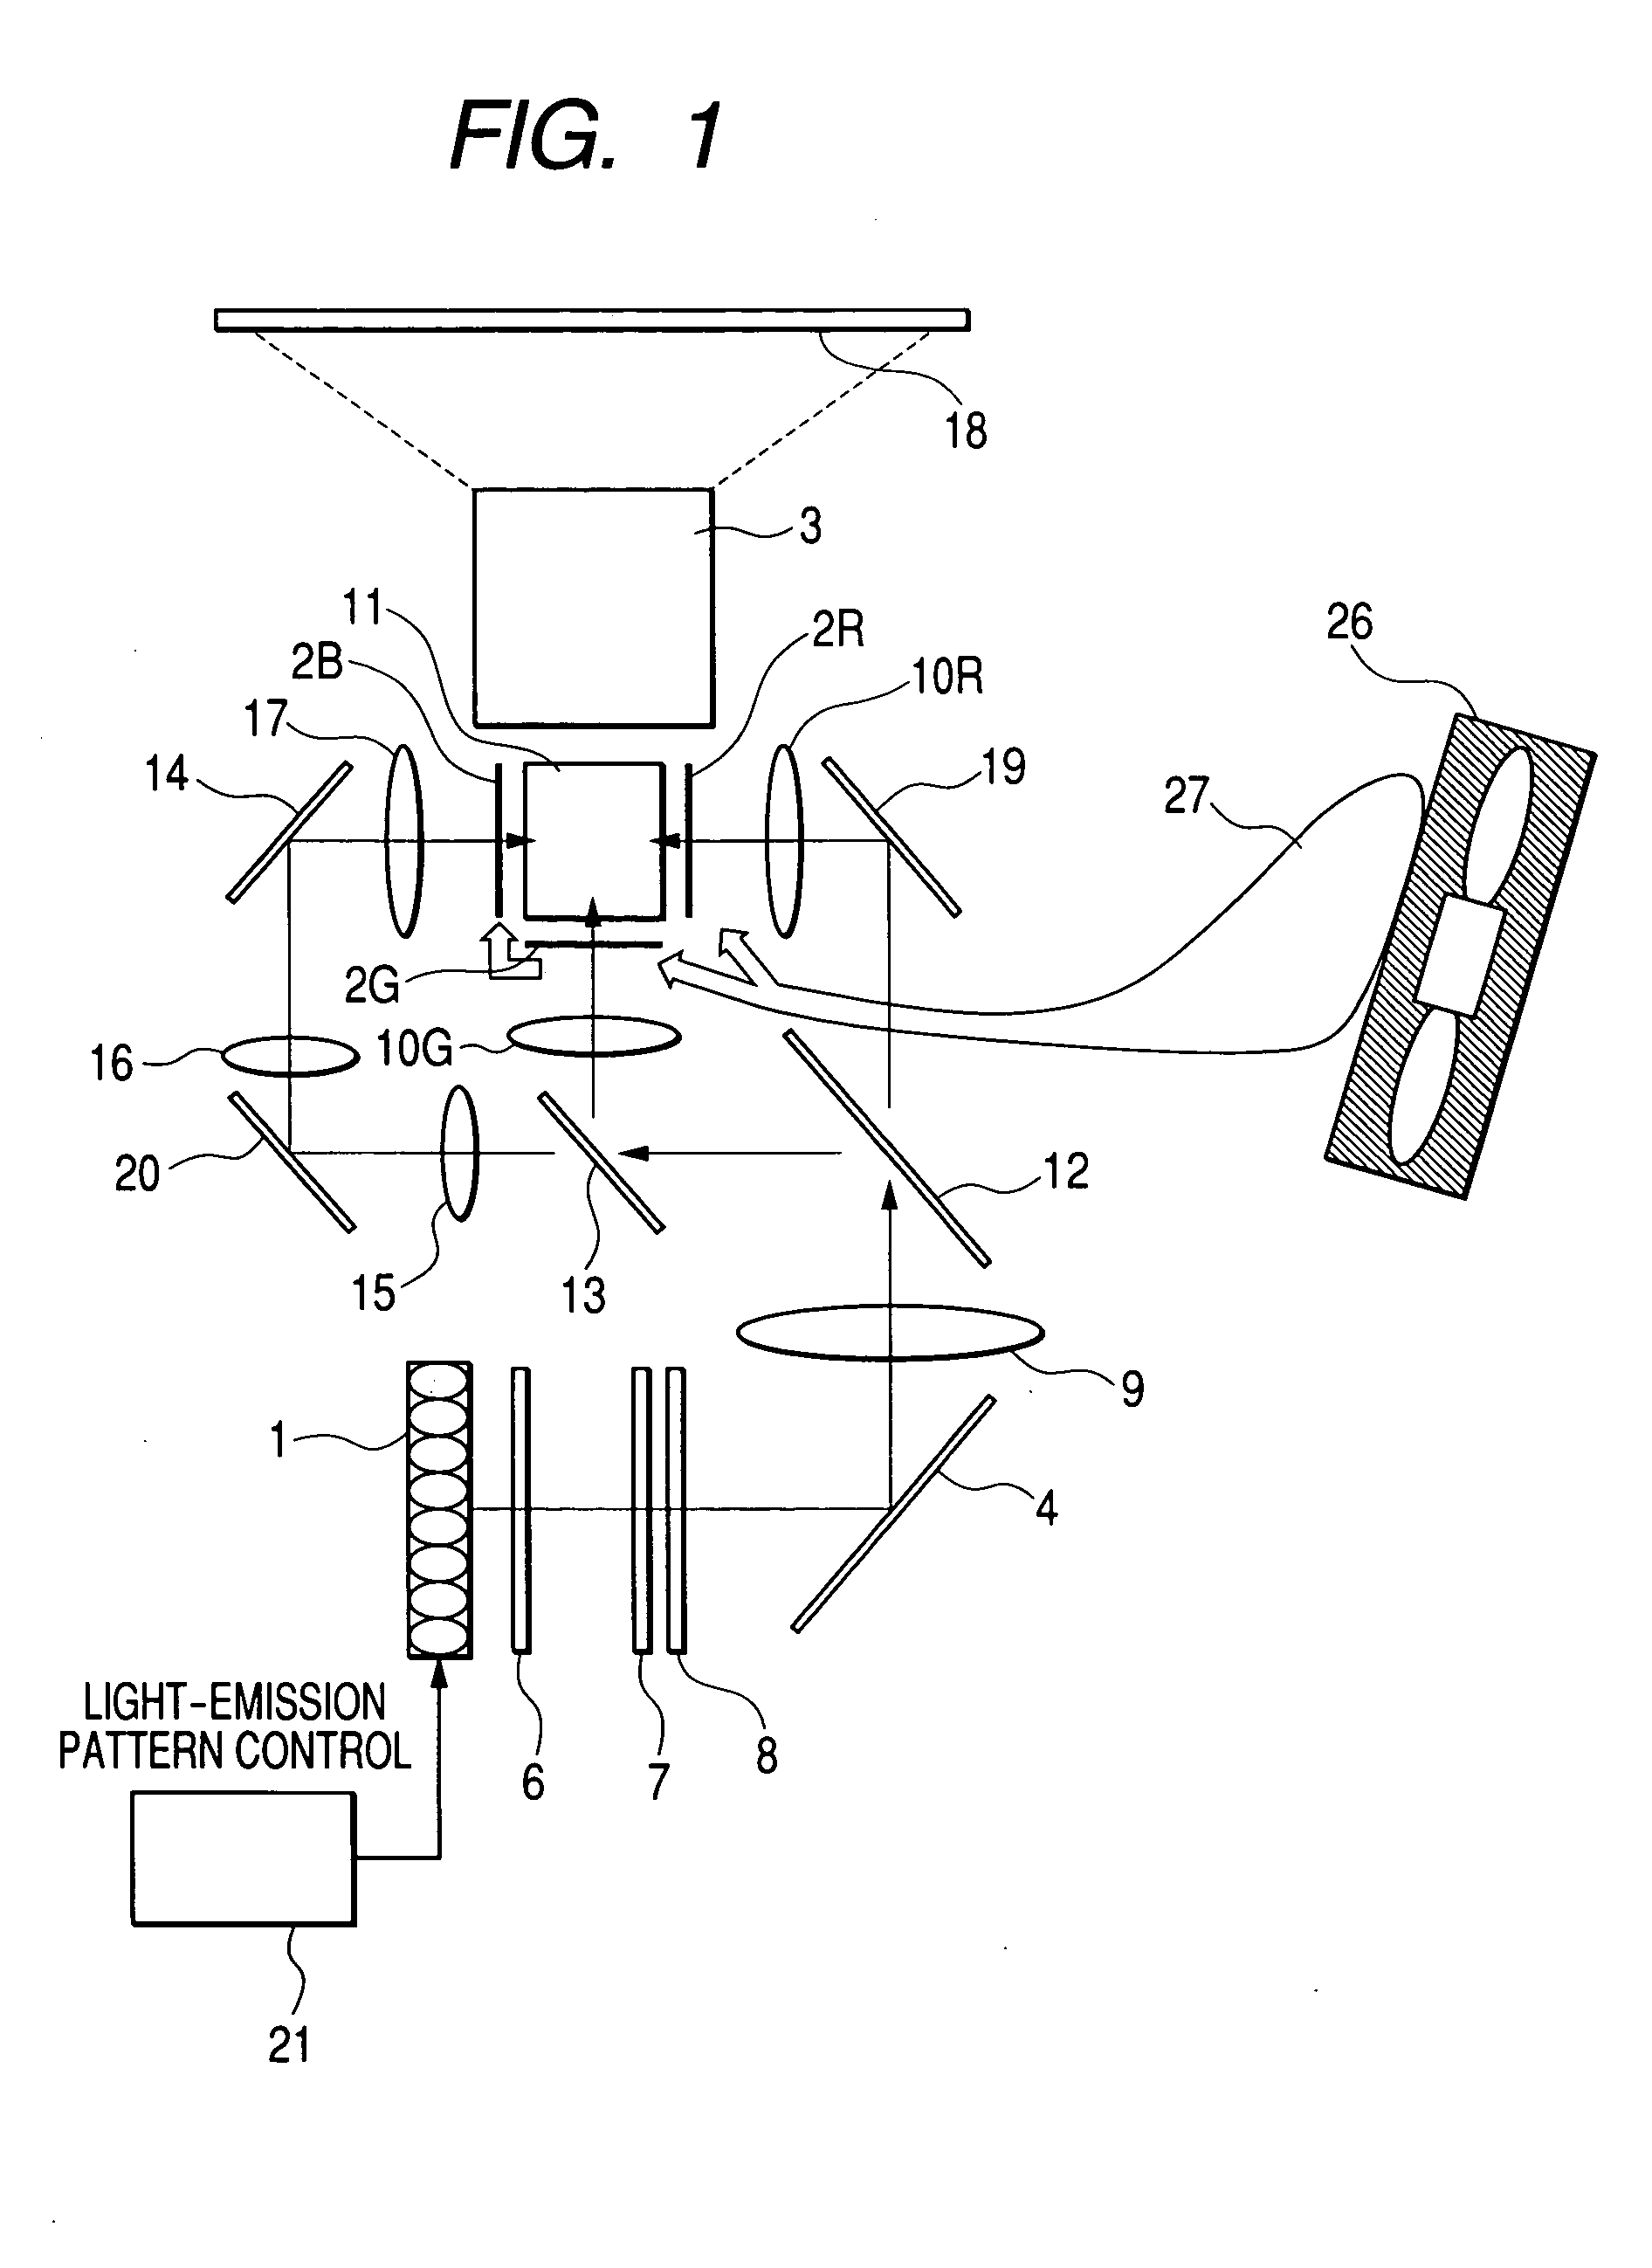 Projection-type image display apparatus